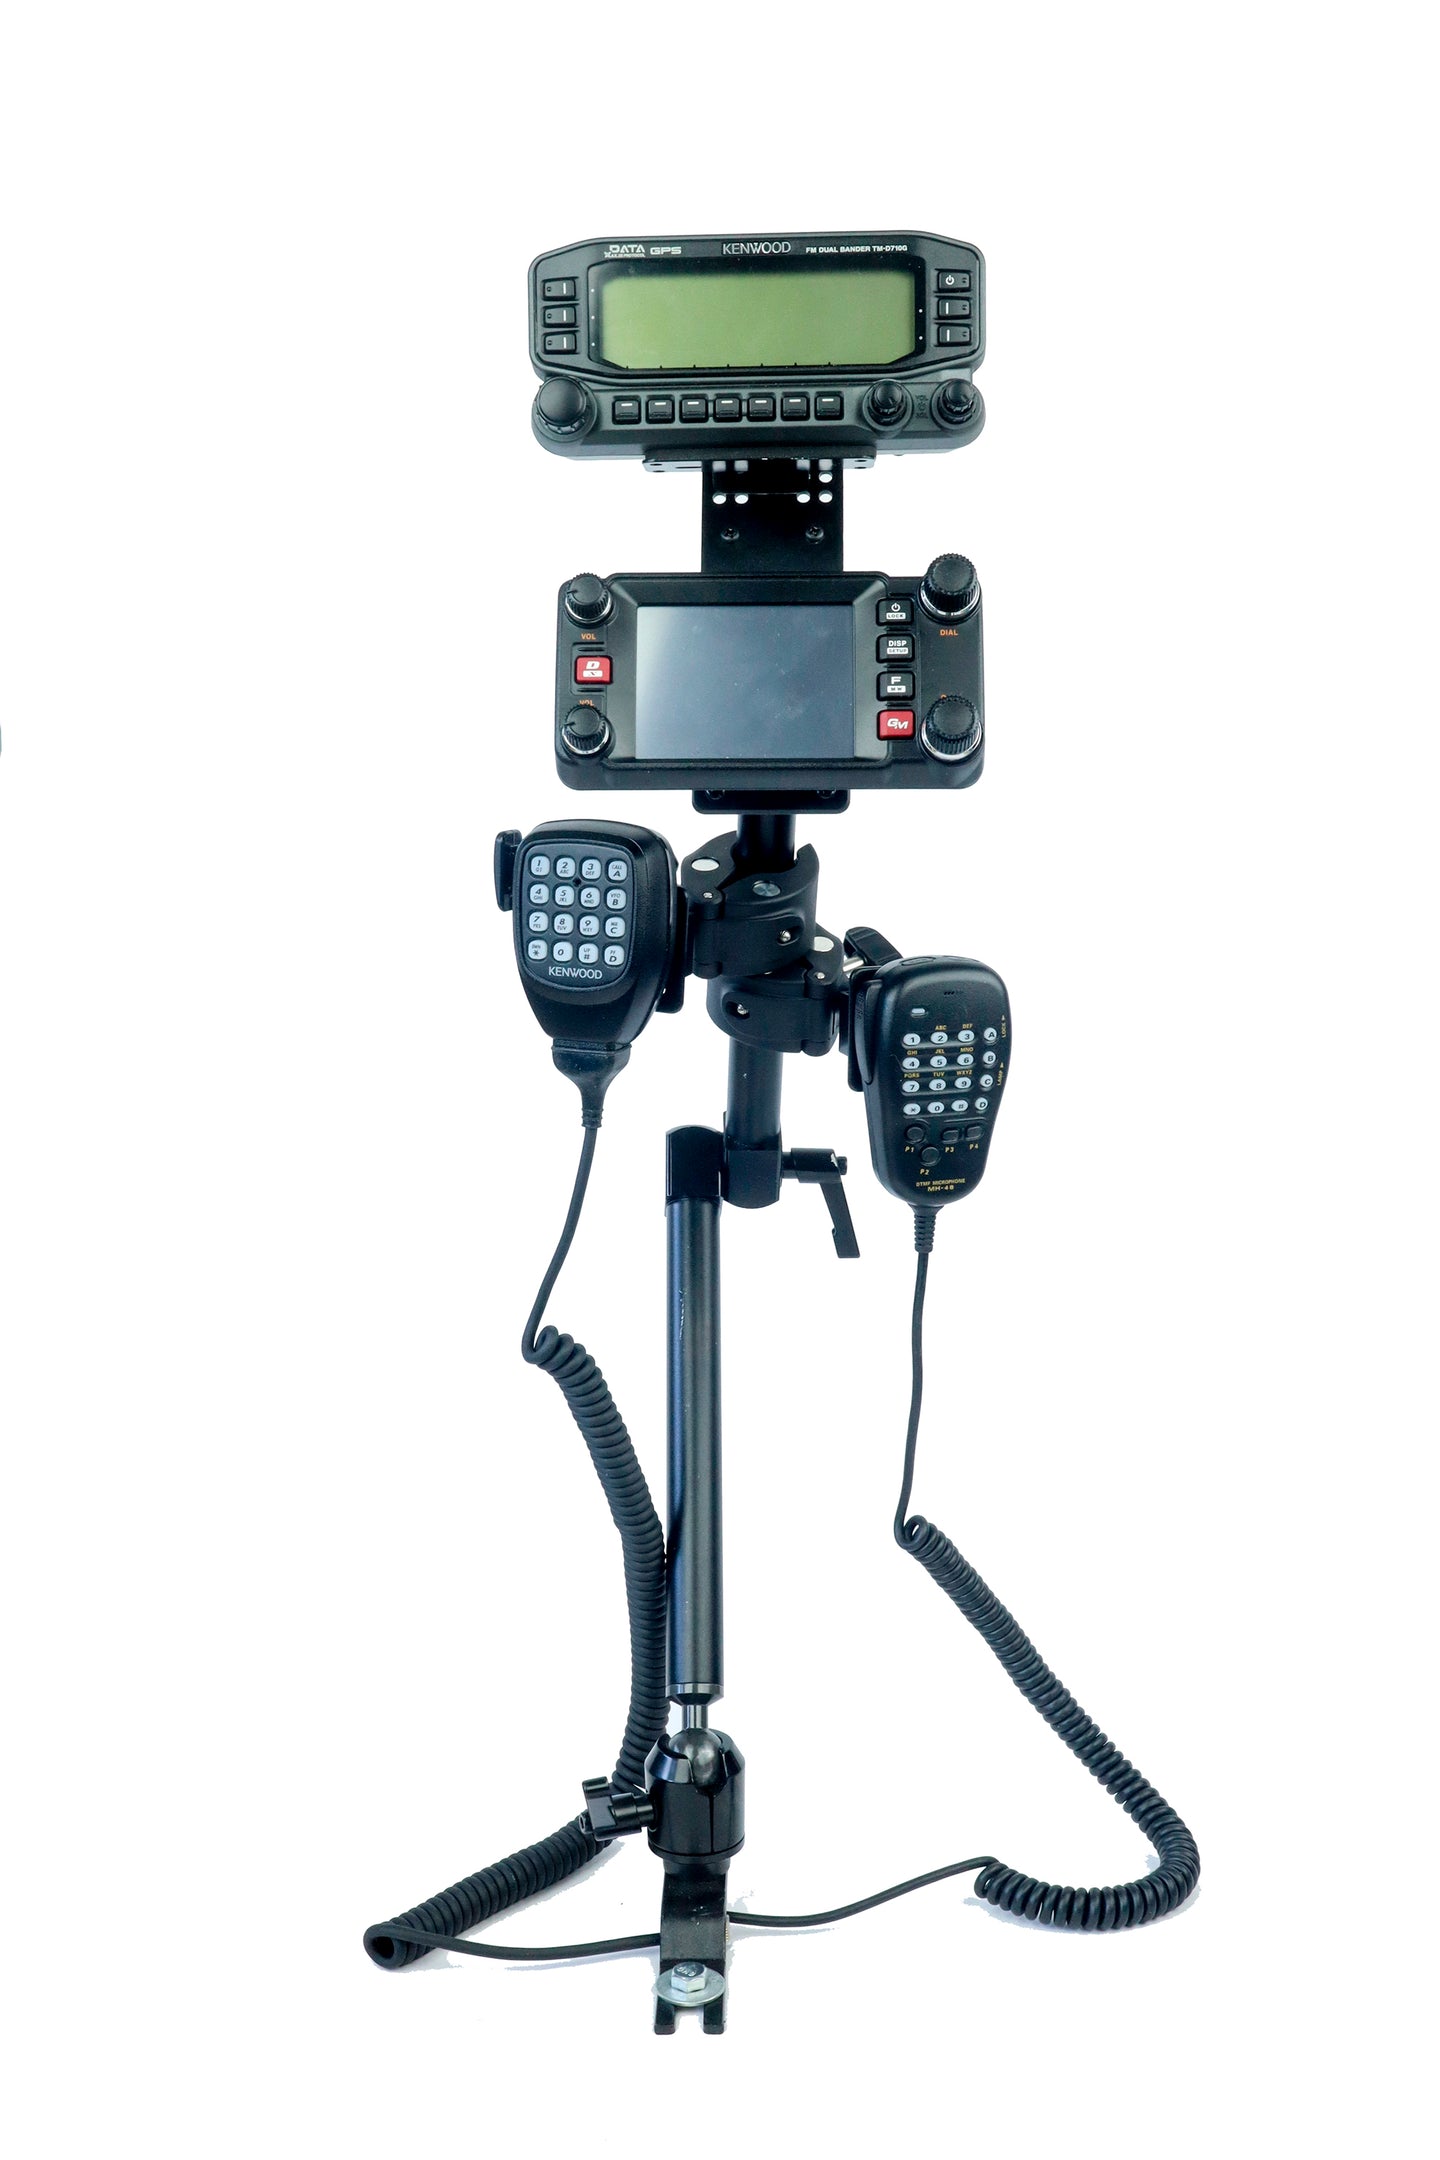 Low Vibration Heavy Duty Seat Rail Mount With Multi-Device Holder and Mic mount for all transceivers